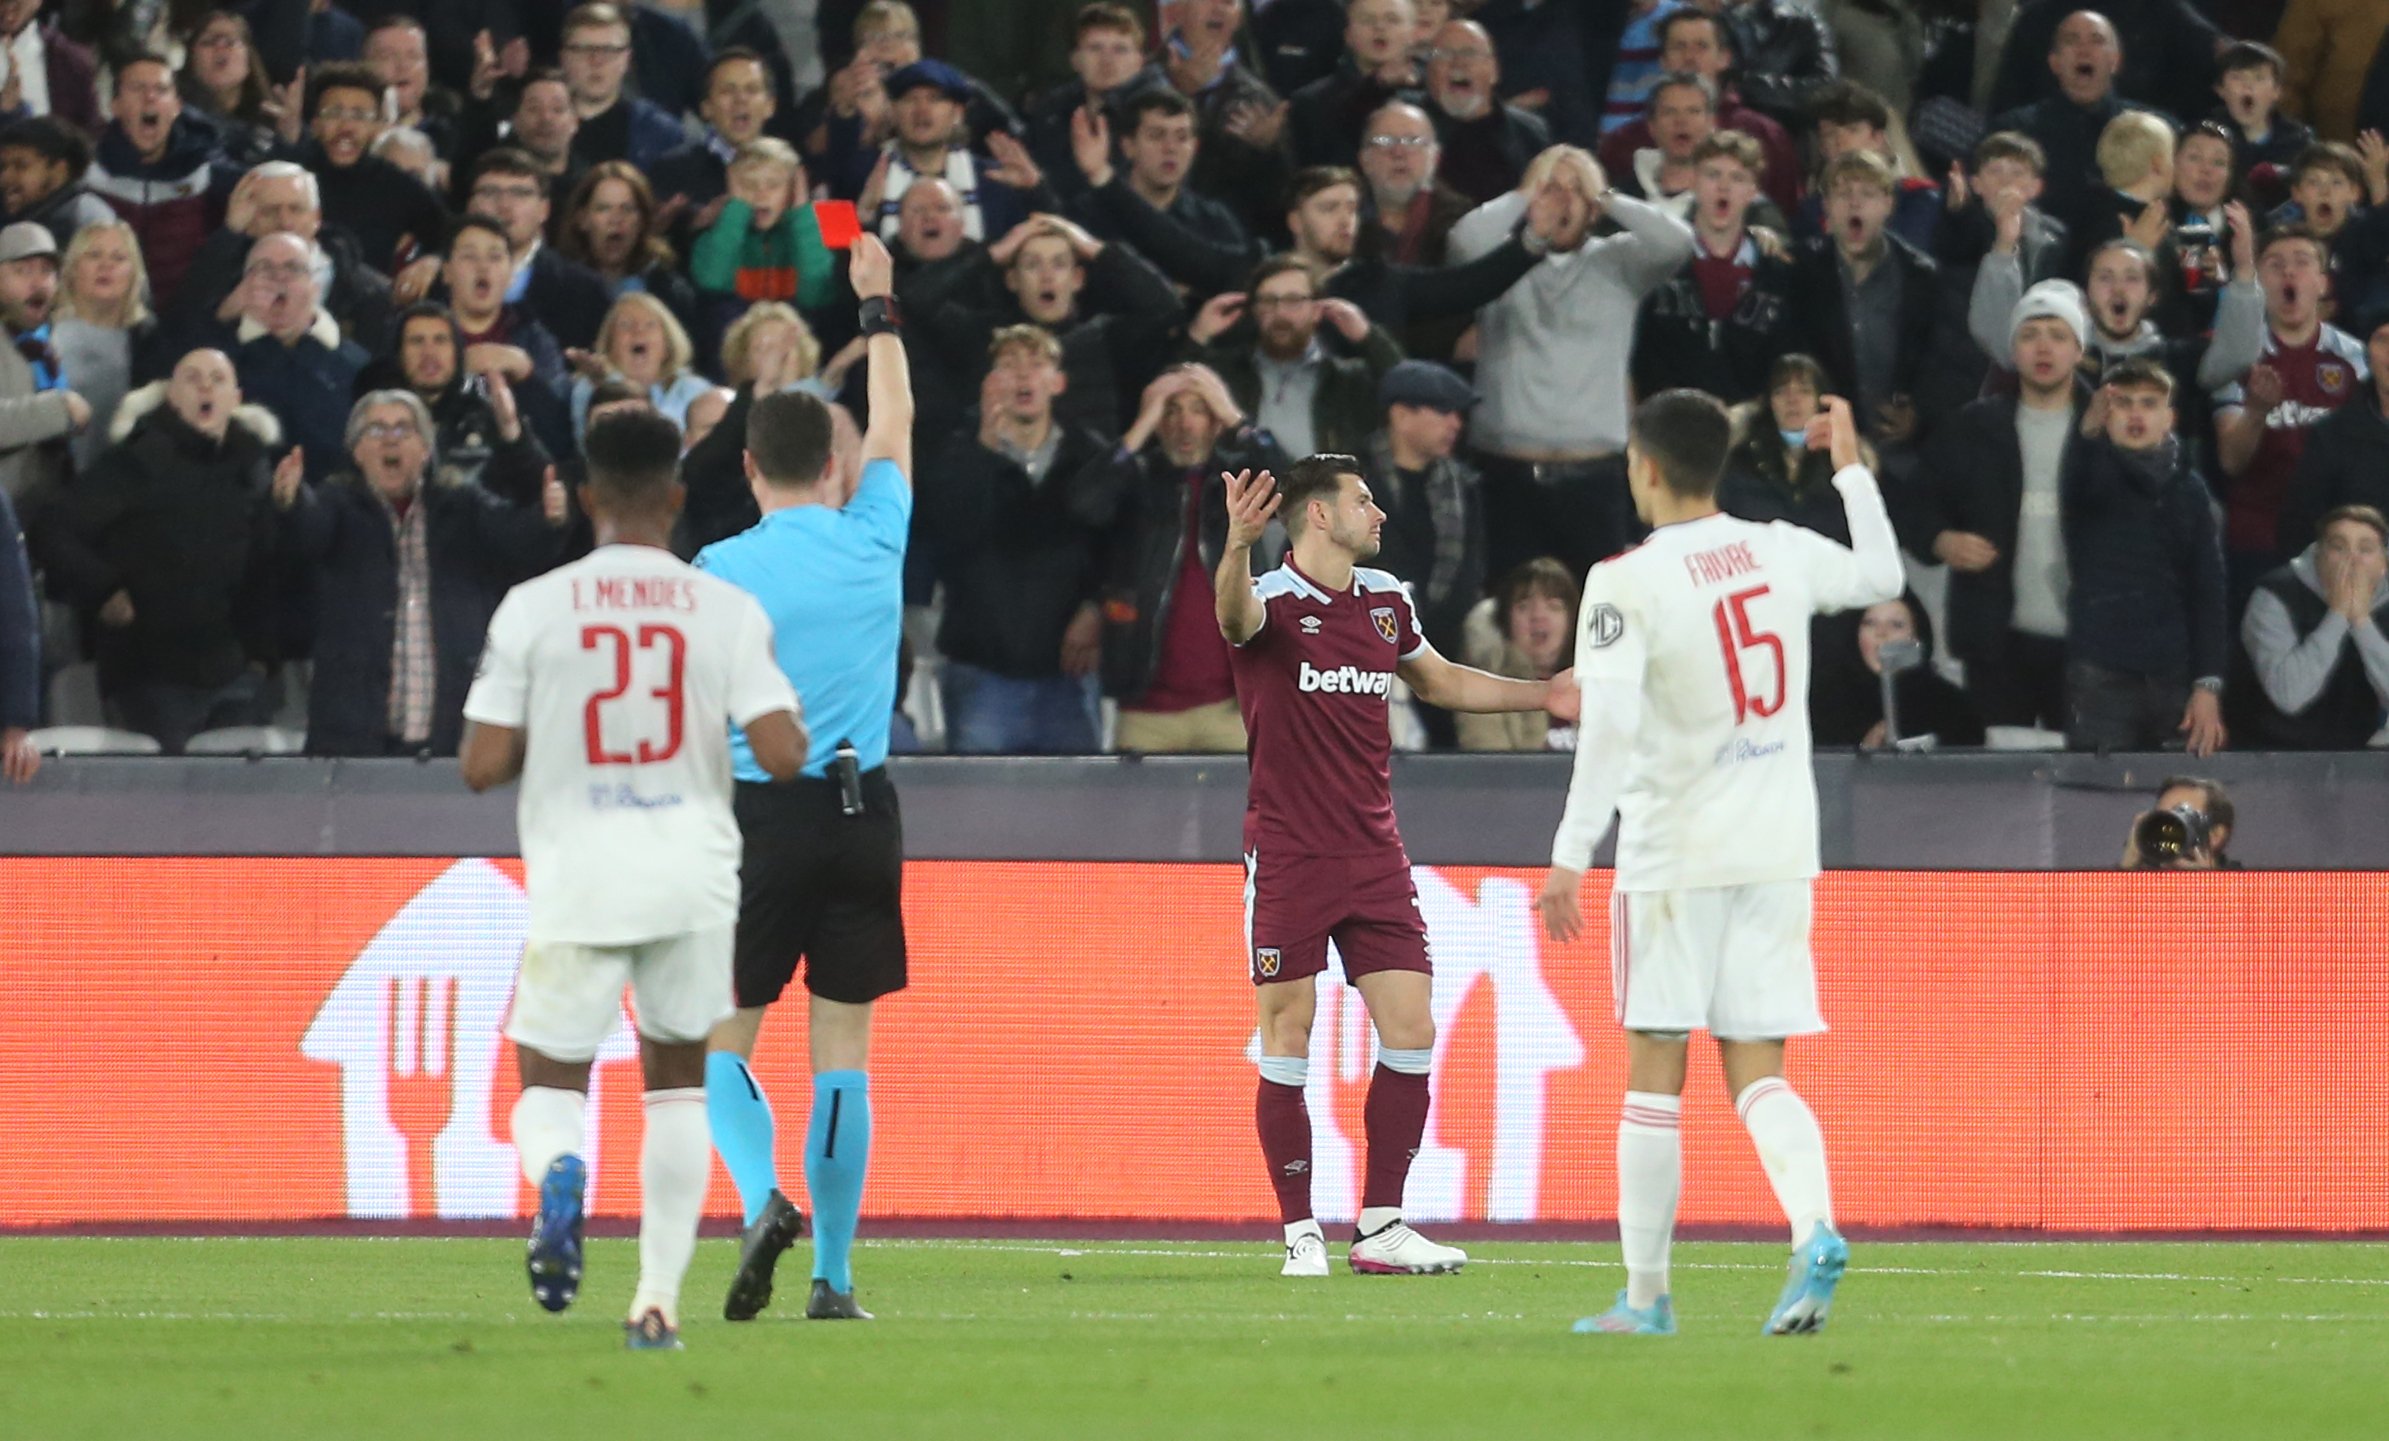 Liam Gallagher reacts on Twitter to shocking Aaron Cresswell red card during West Ham vs Lyon clash